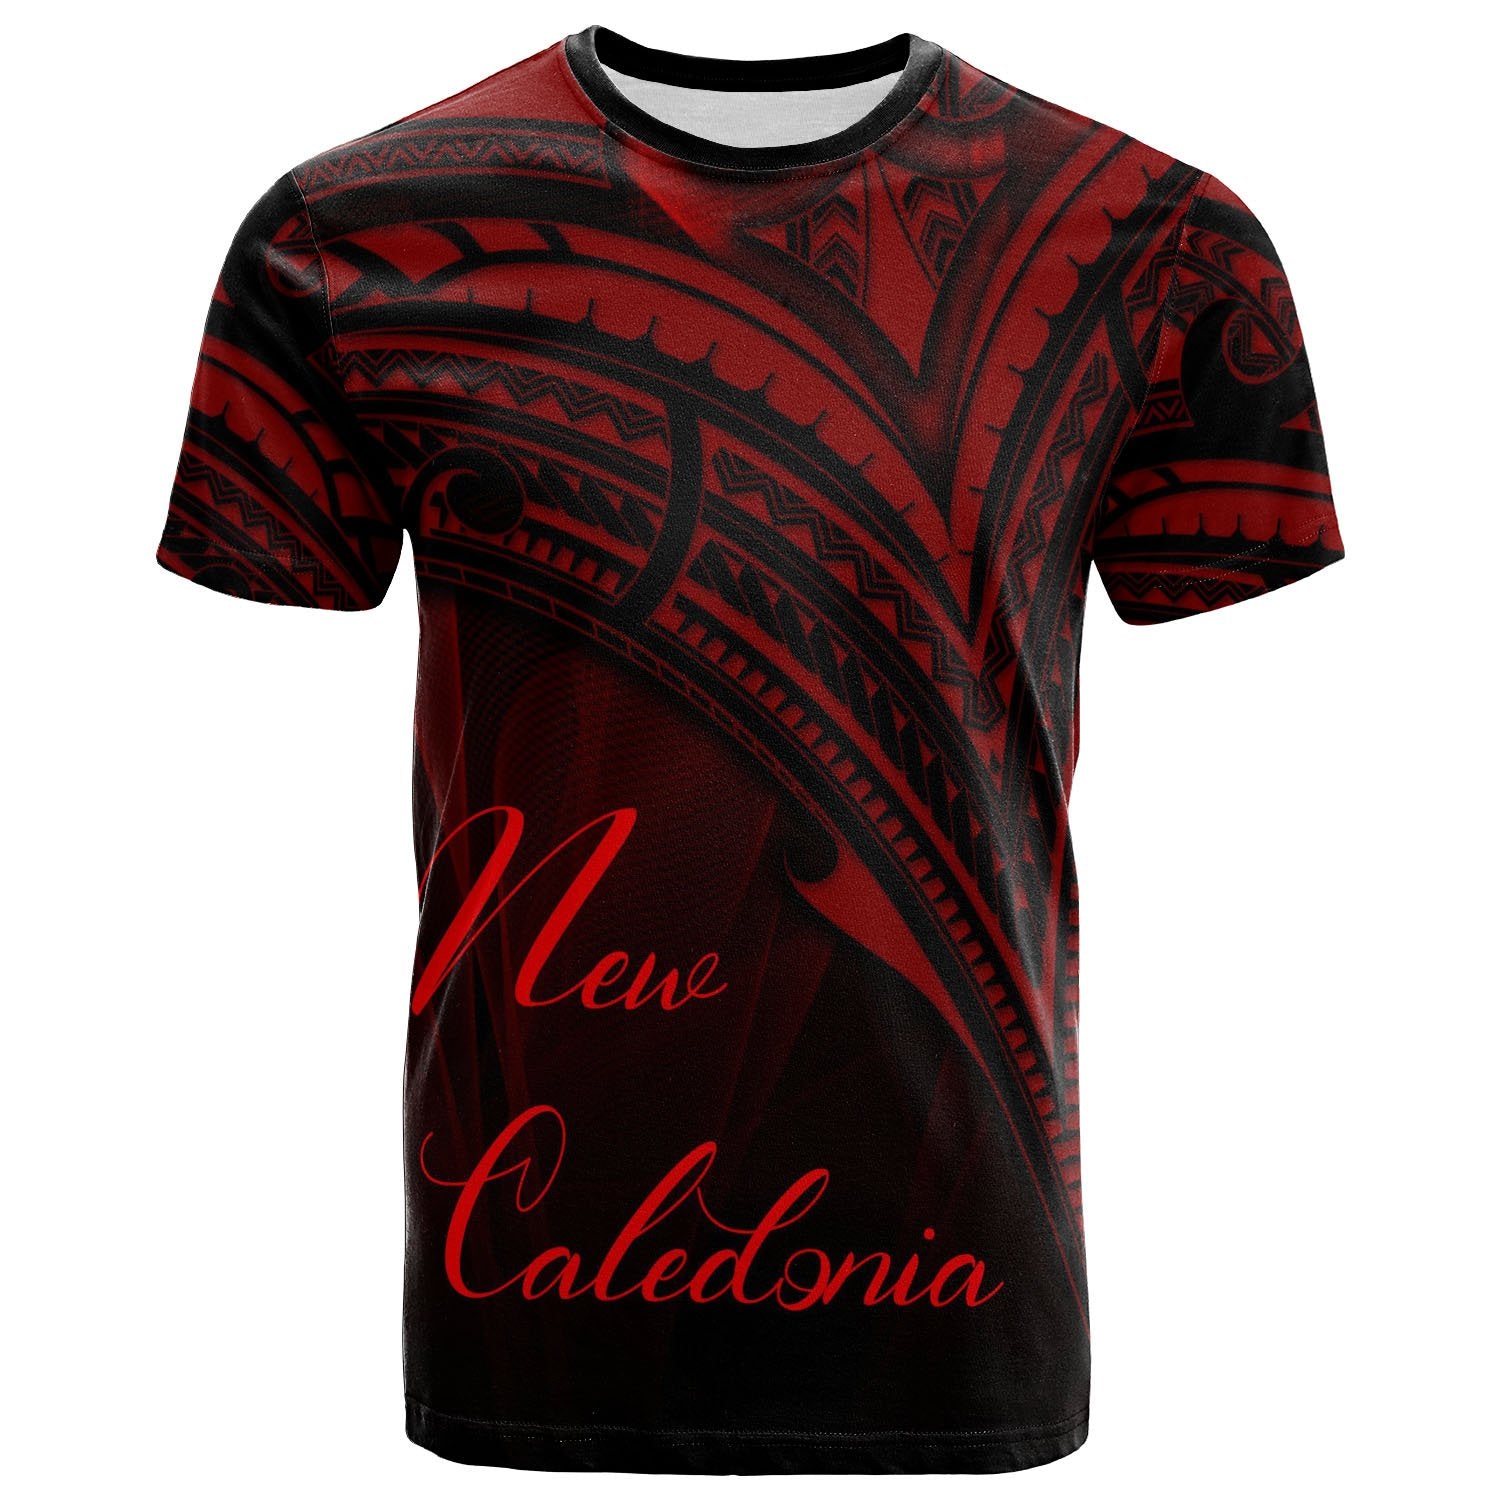 New Caledonia T Shirt Red Color Cross Style Unisex Black - Polynesian Pride